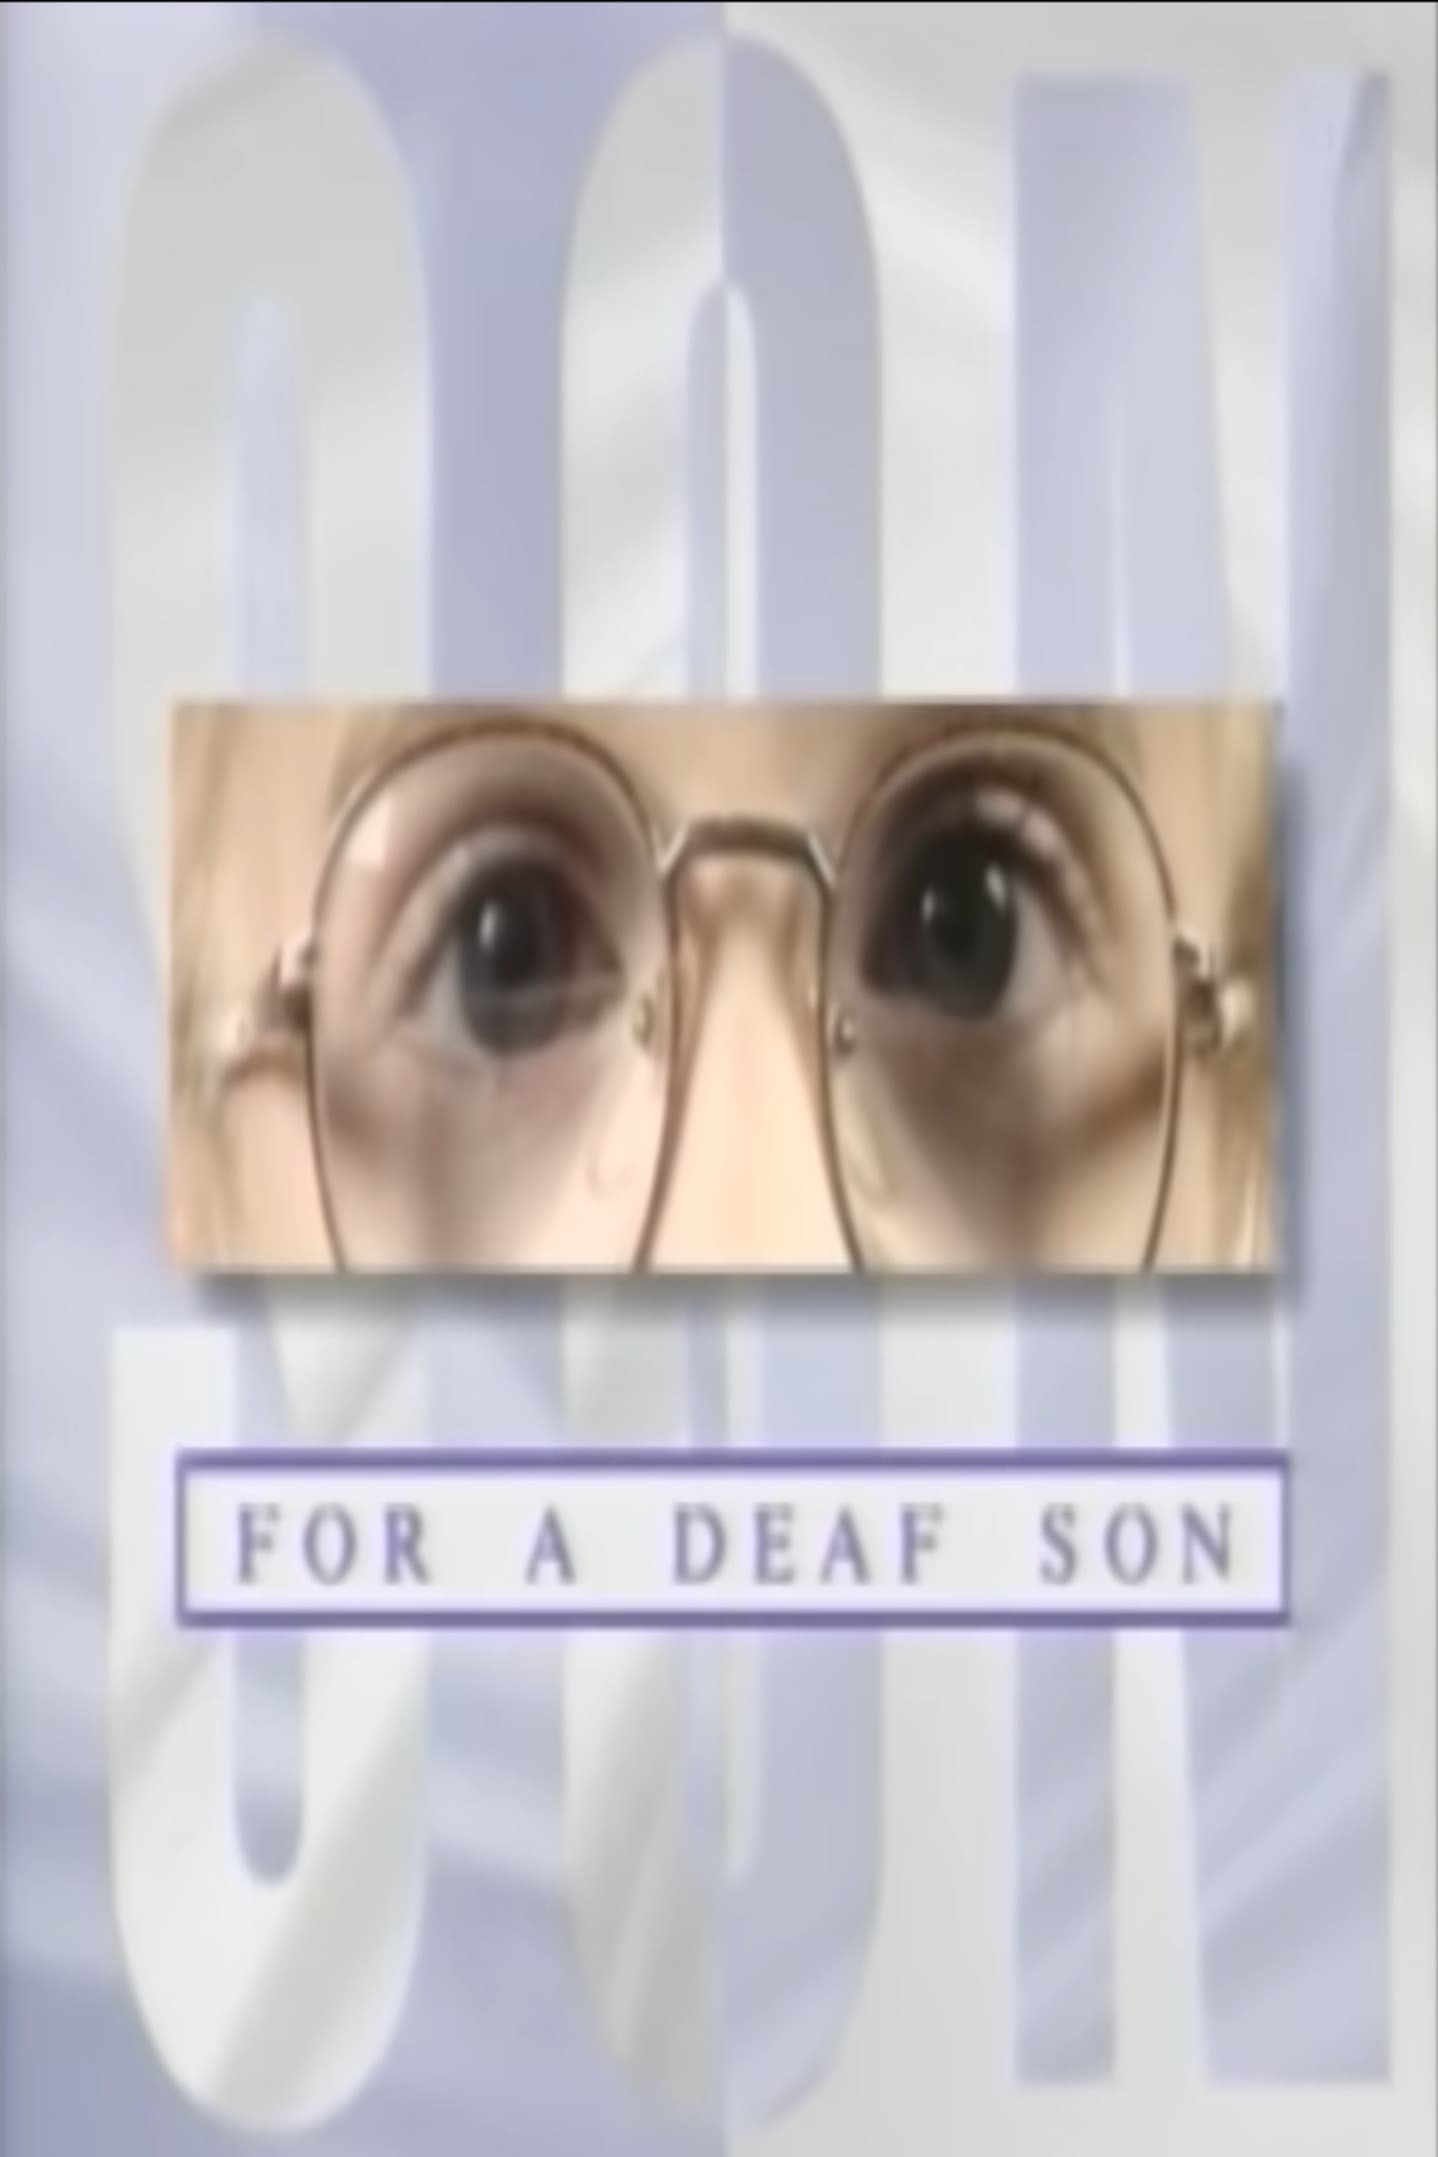 For a Deaf Son